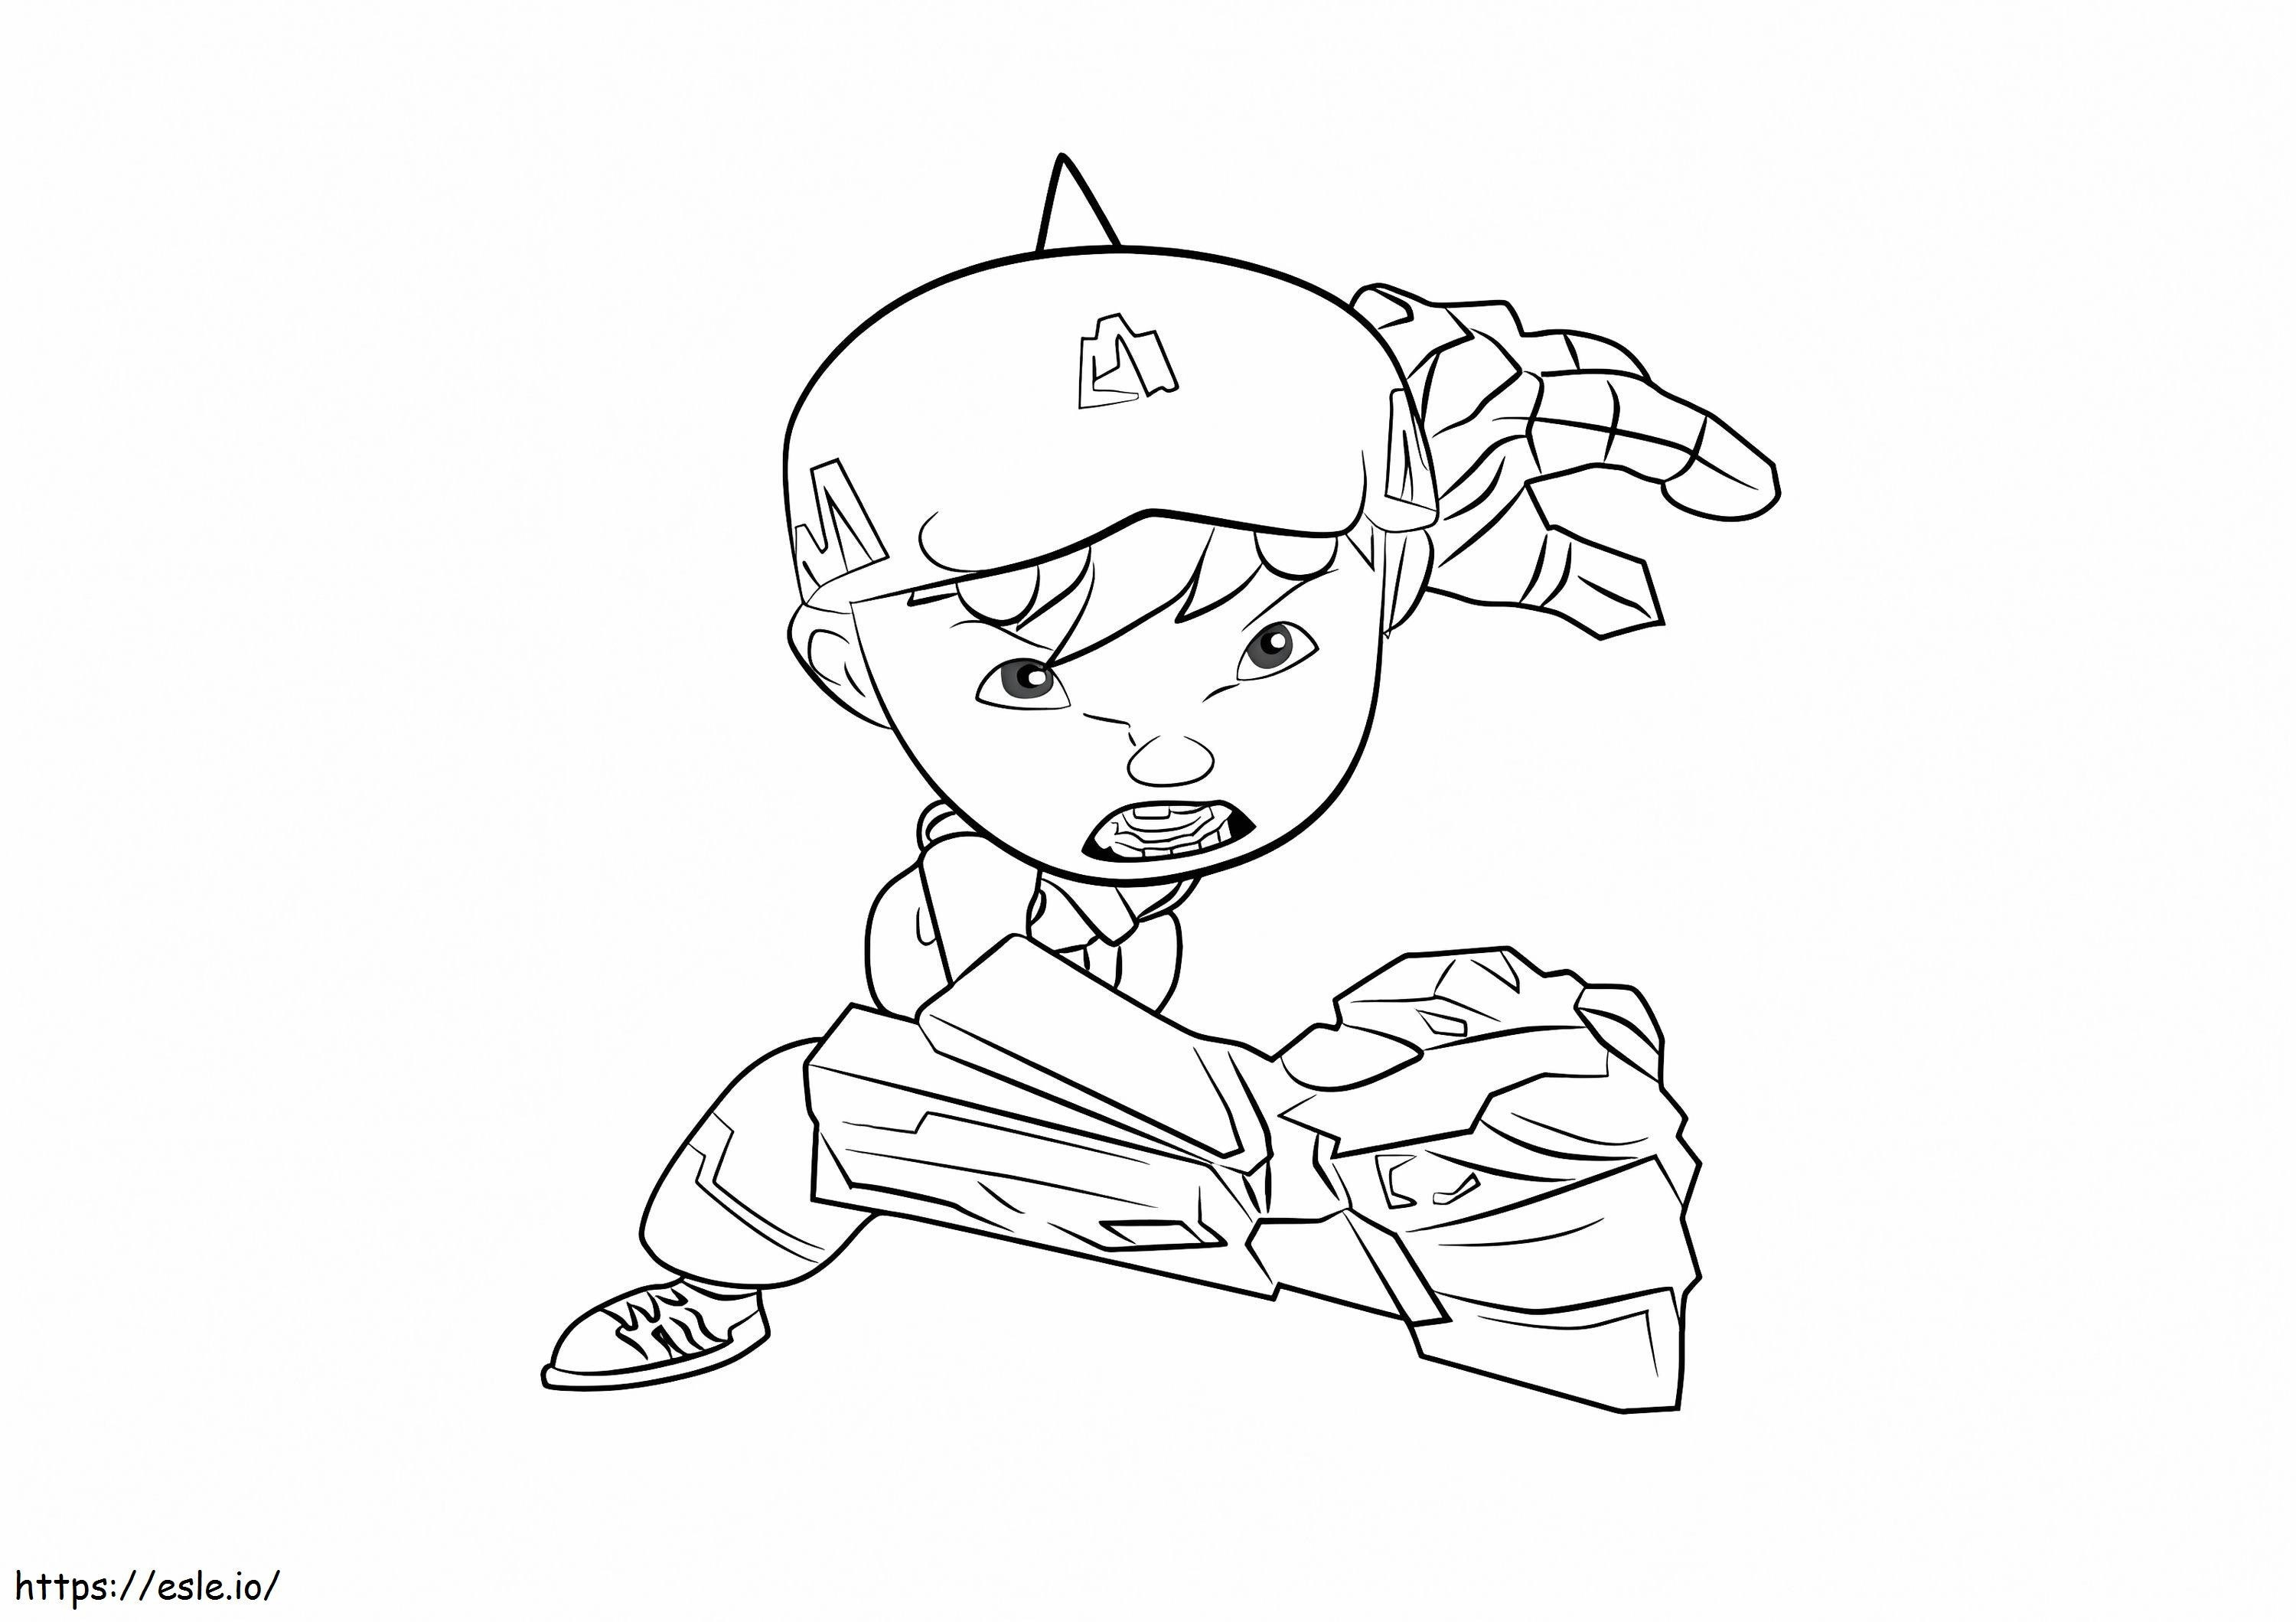 1599091914 How To Draw Boboiboy Quake From Boboiboy Step 0 coloring page